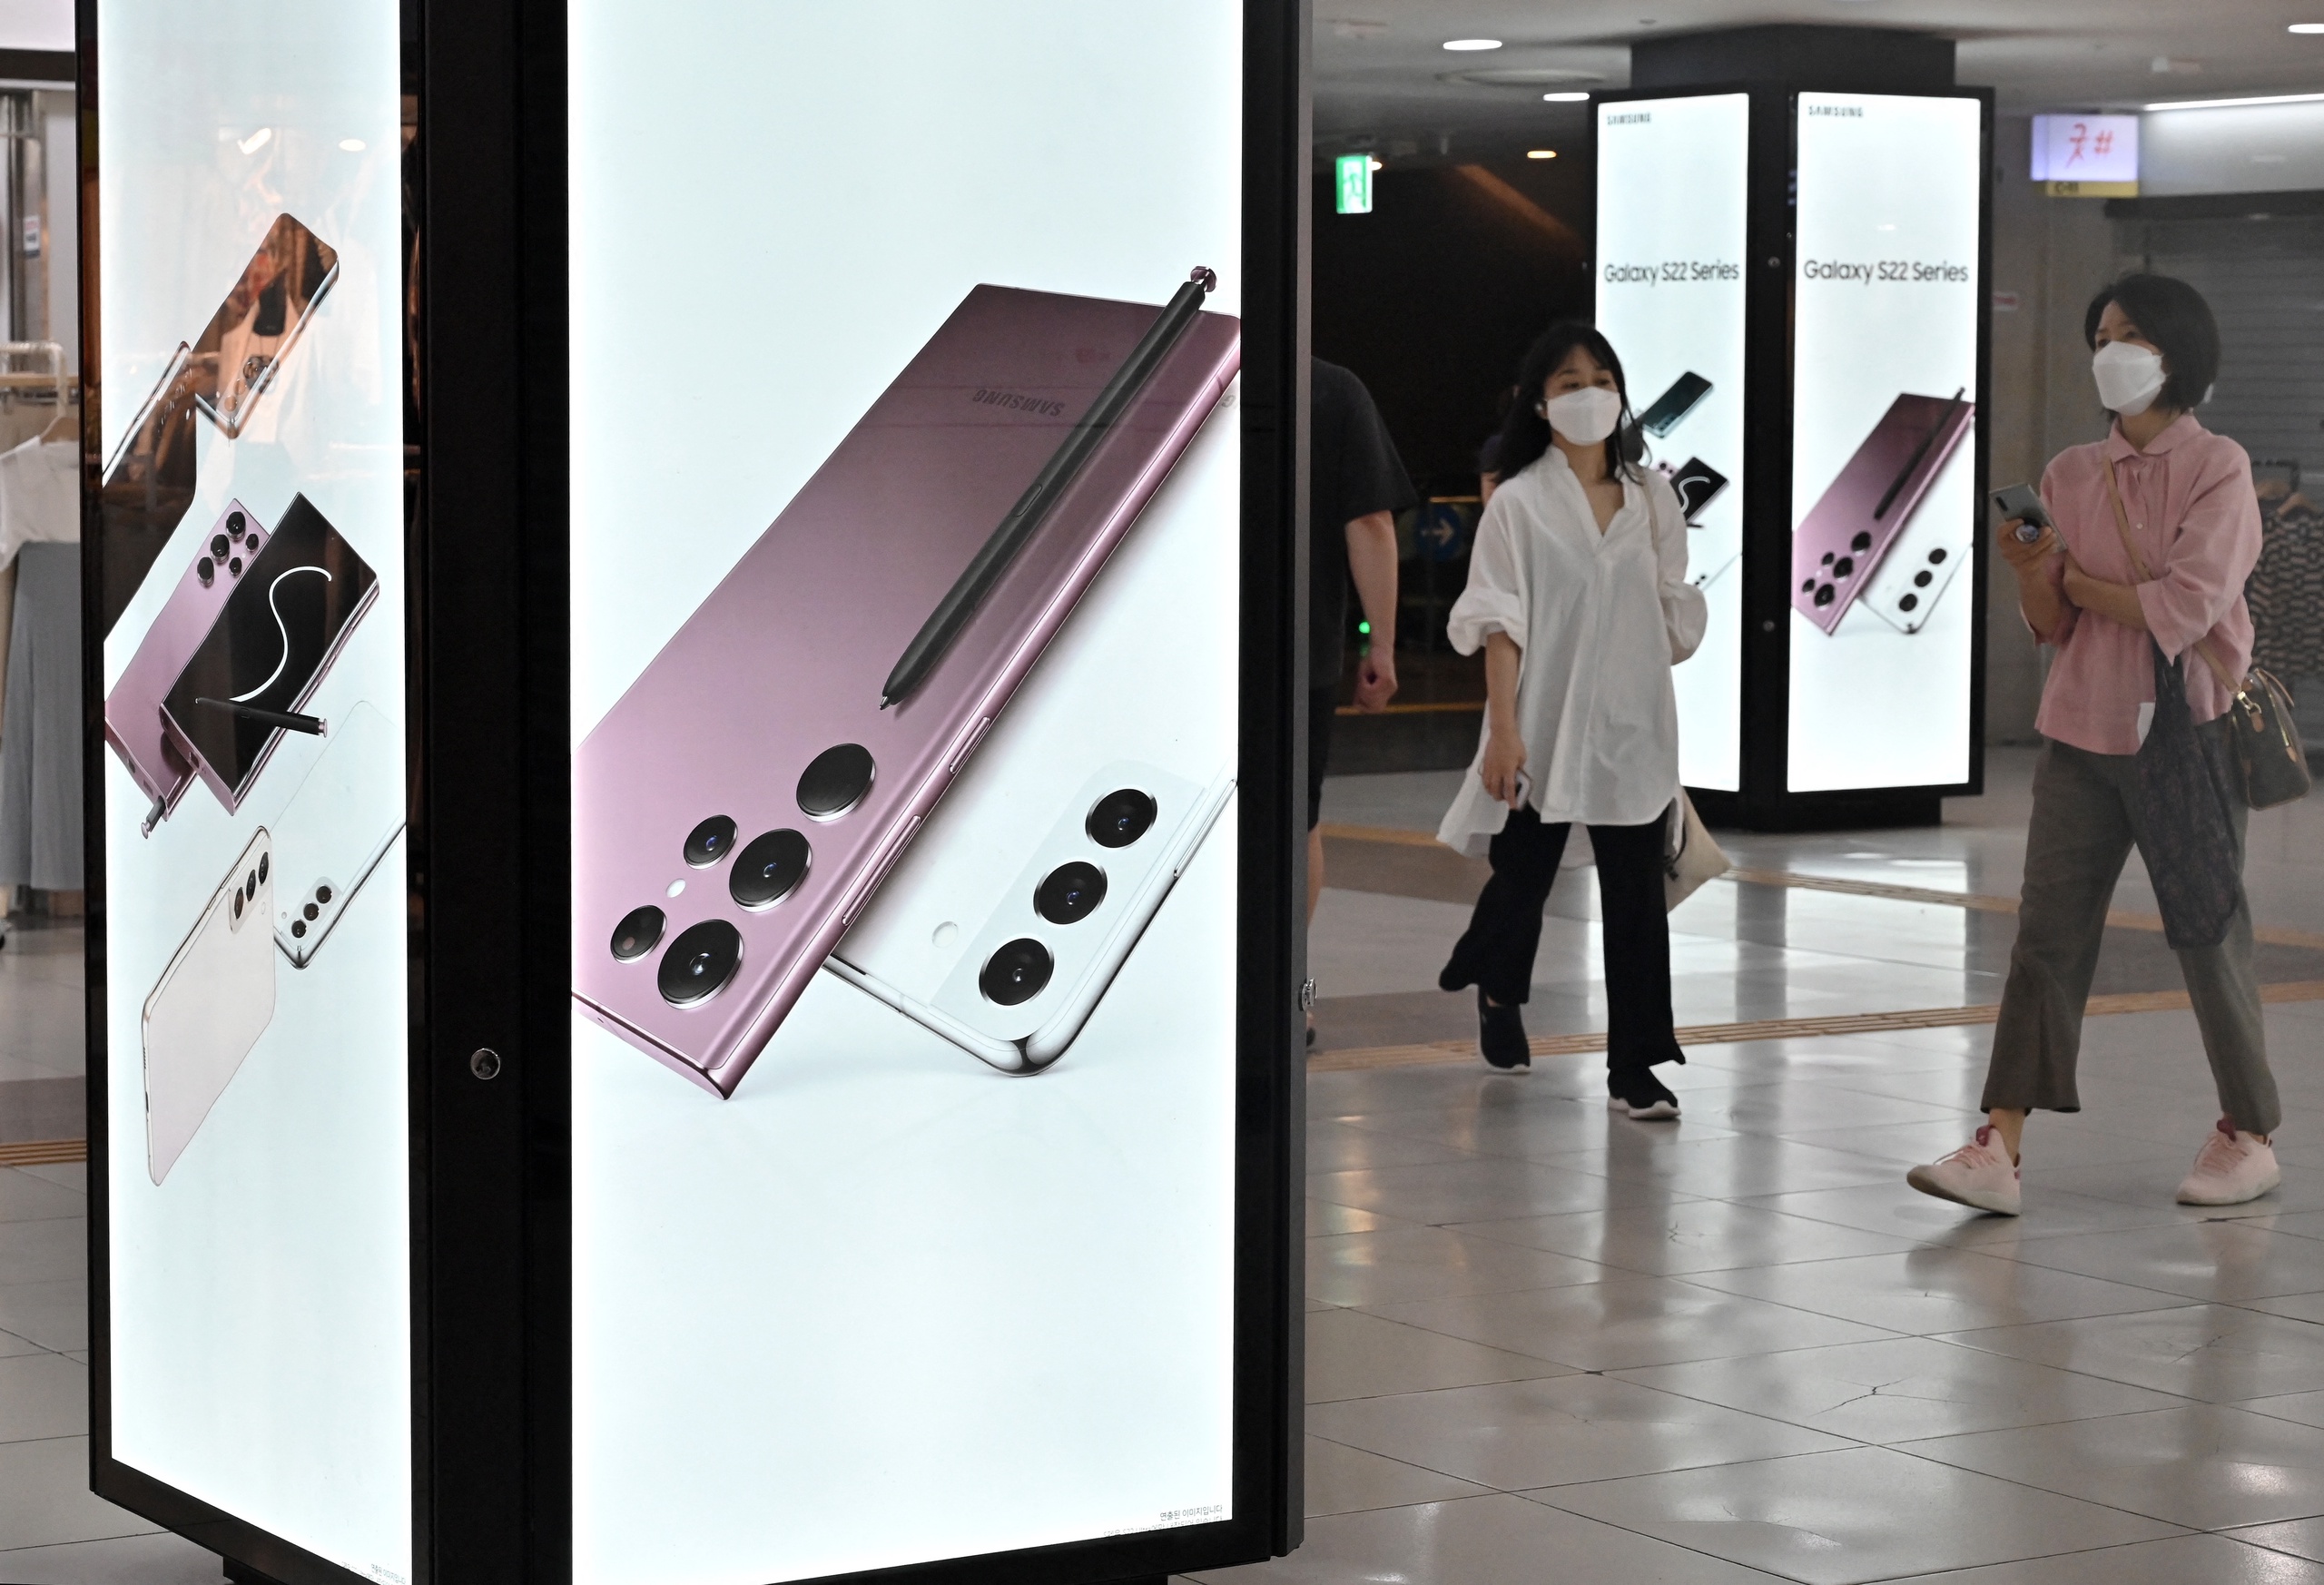 People walk past an advertisement for the Samsung Galaxy S22 smartphone at a Seoul subway station.